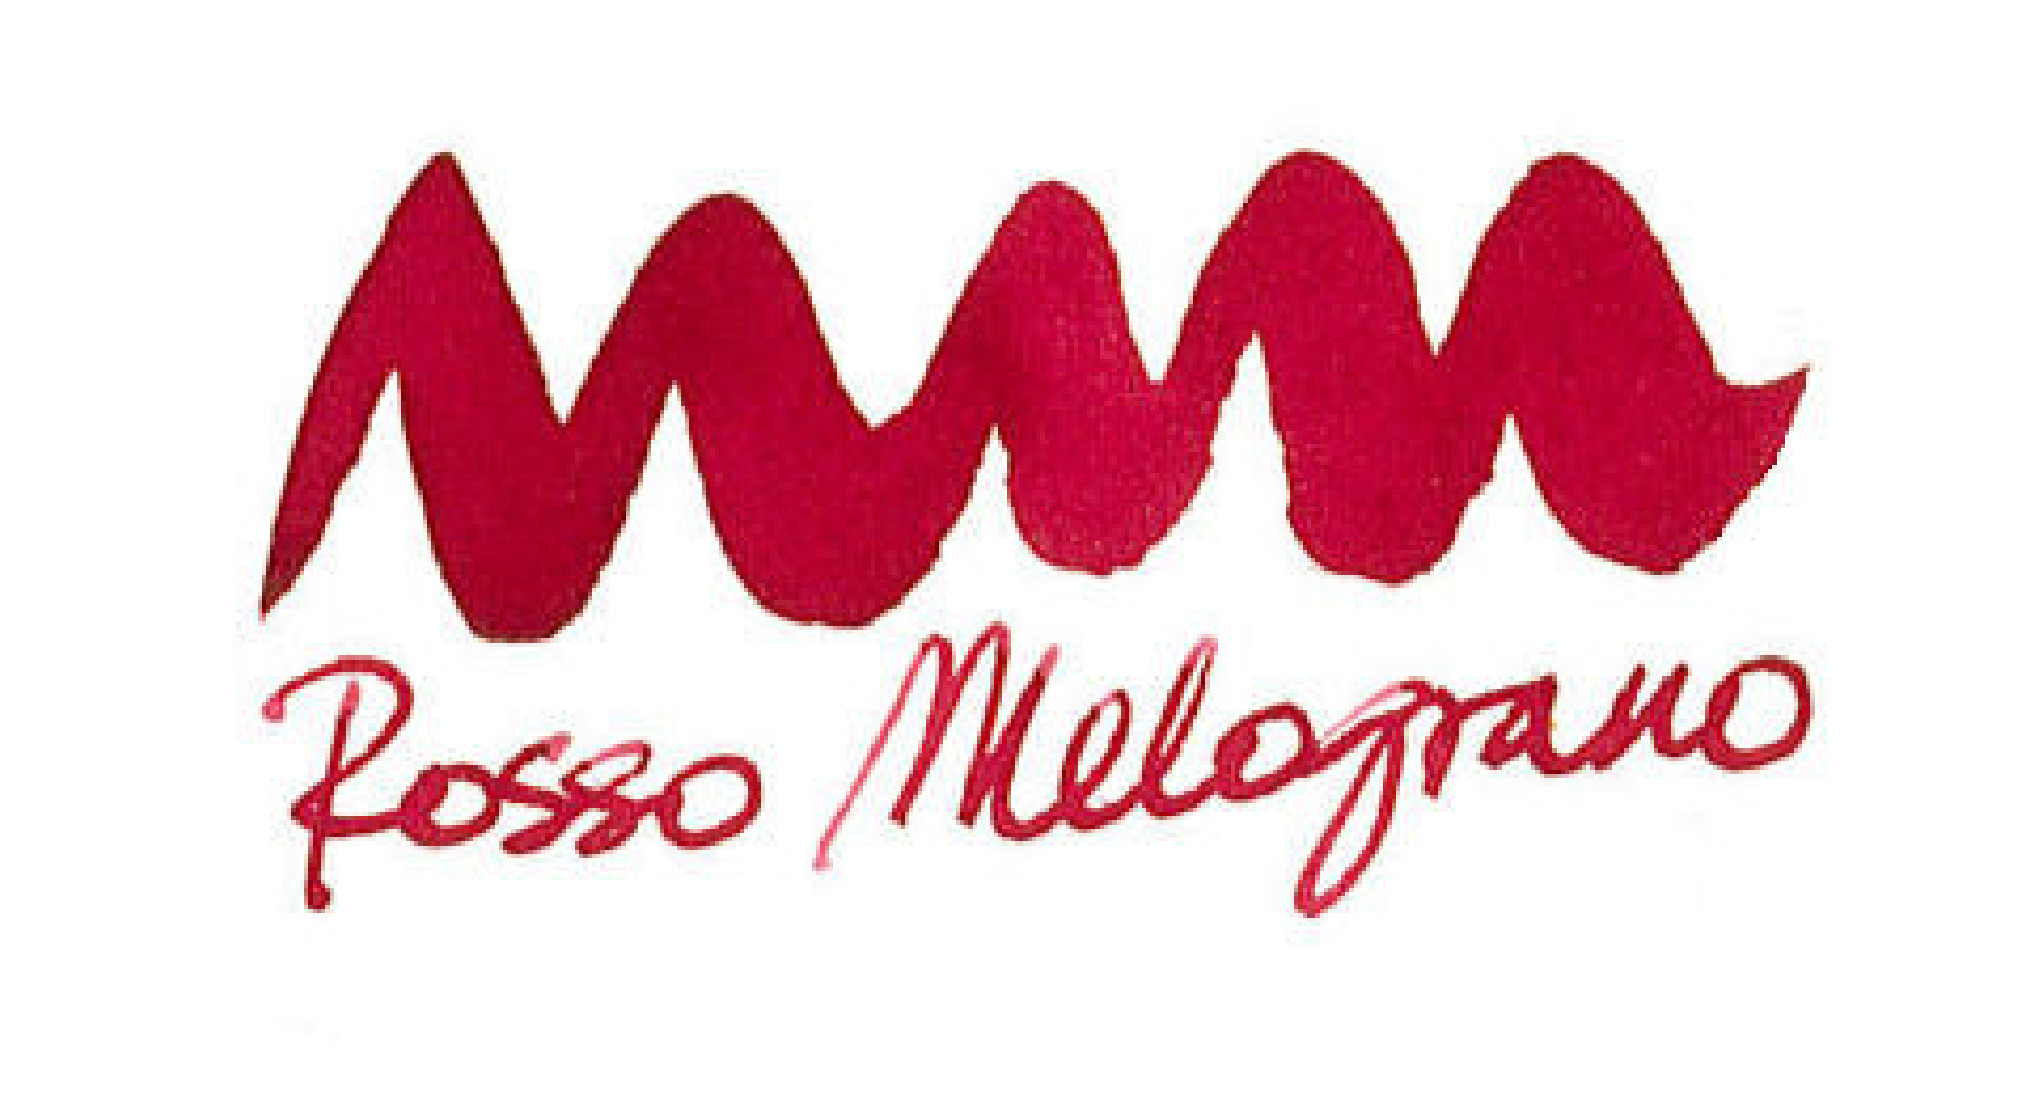 Scribo Rosso Melograno, the full flavour of juice 90ml bottle ink